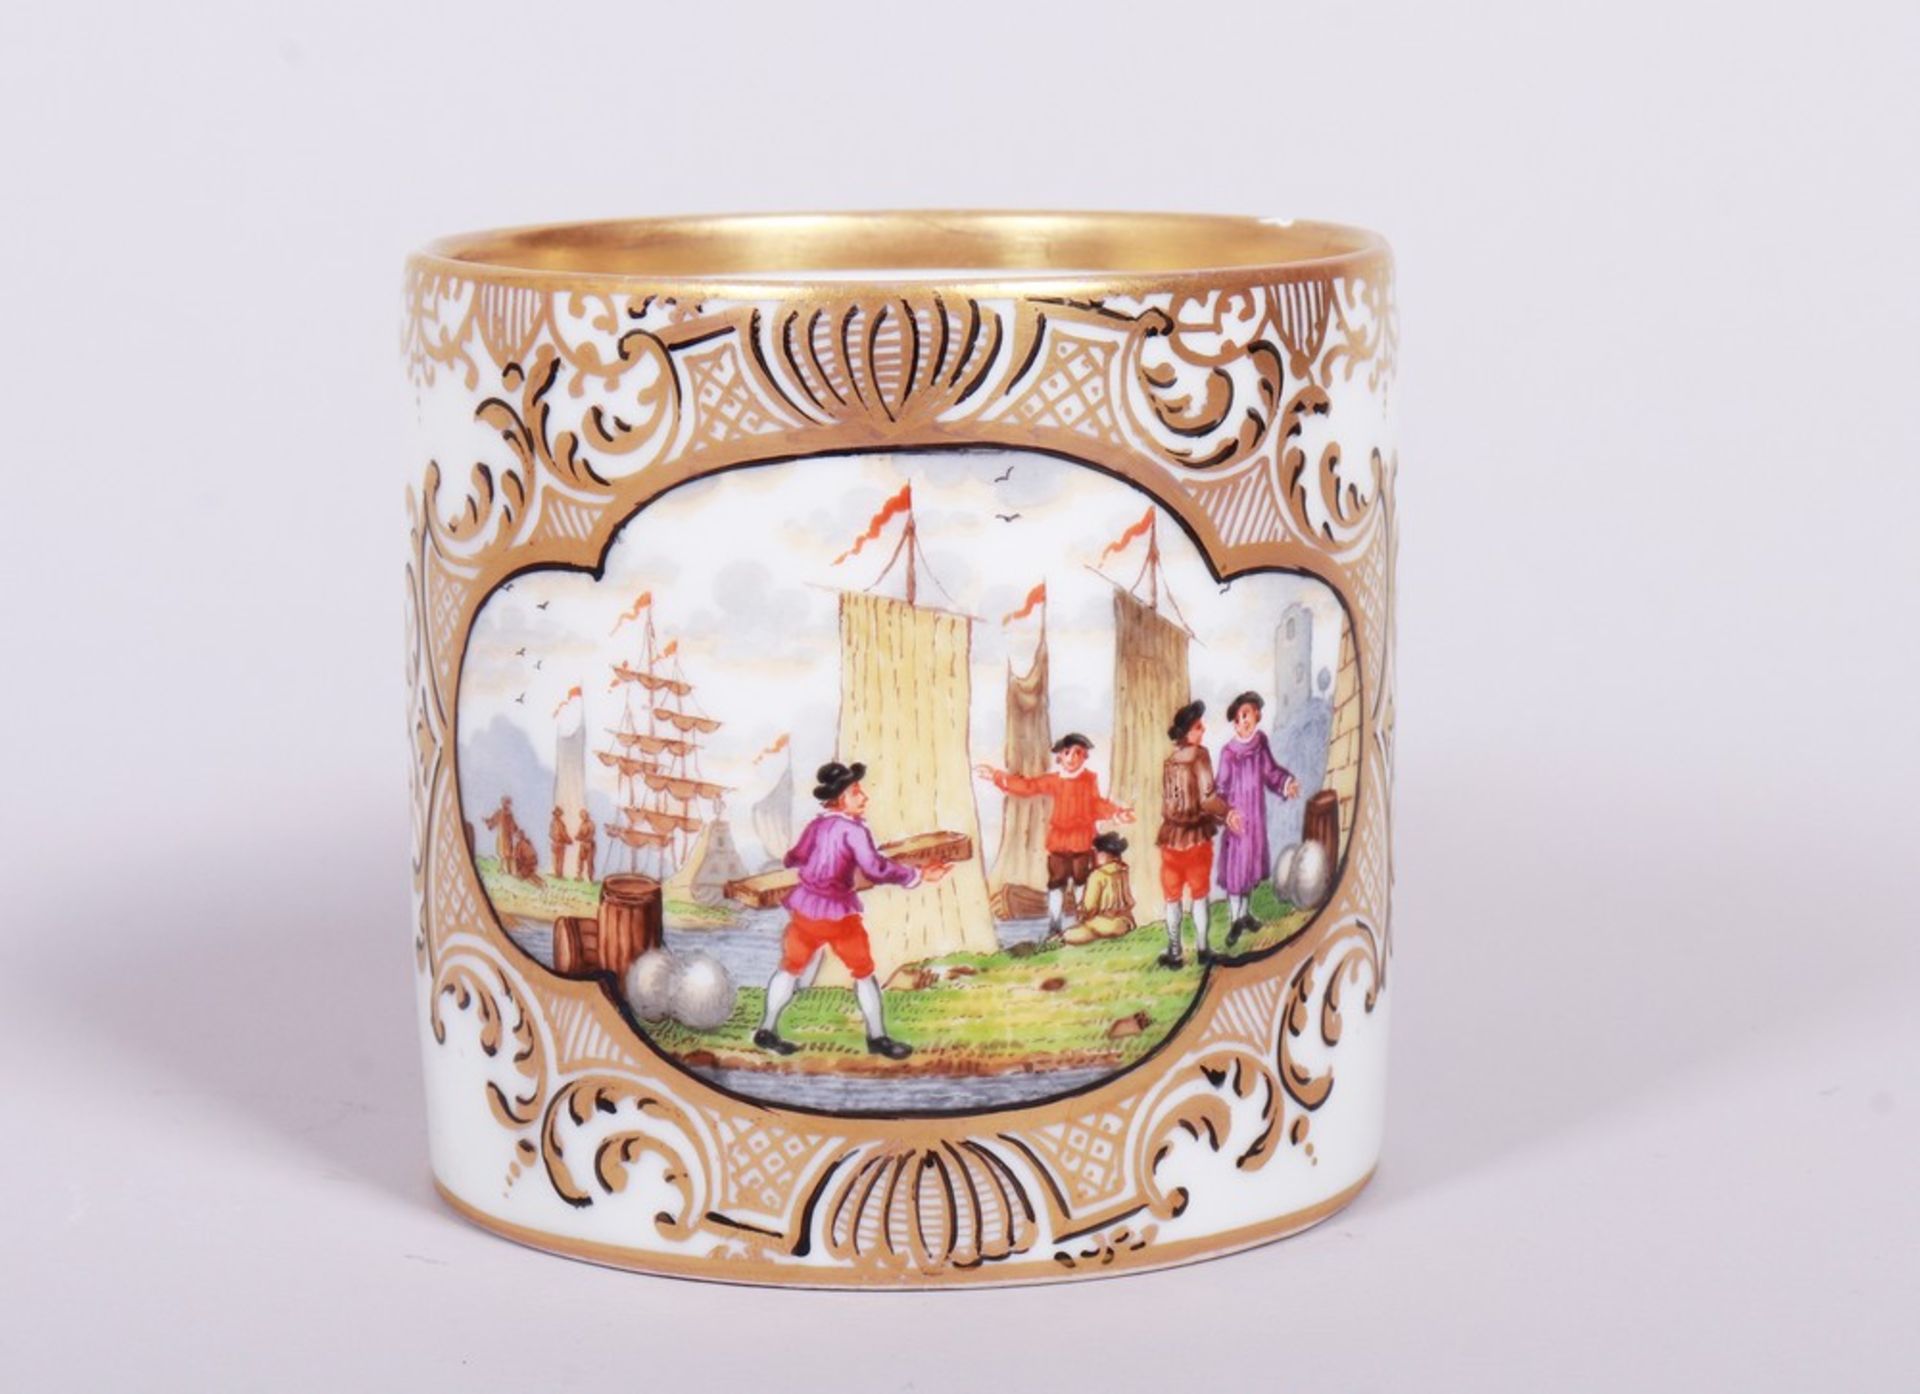 Decorative cup, KPM-Berlin, probably c. 1900 - Image 2 of 4